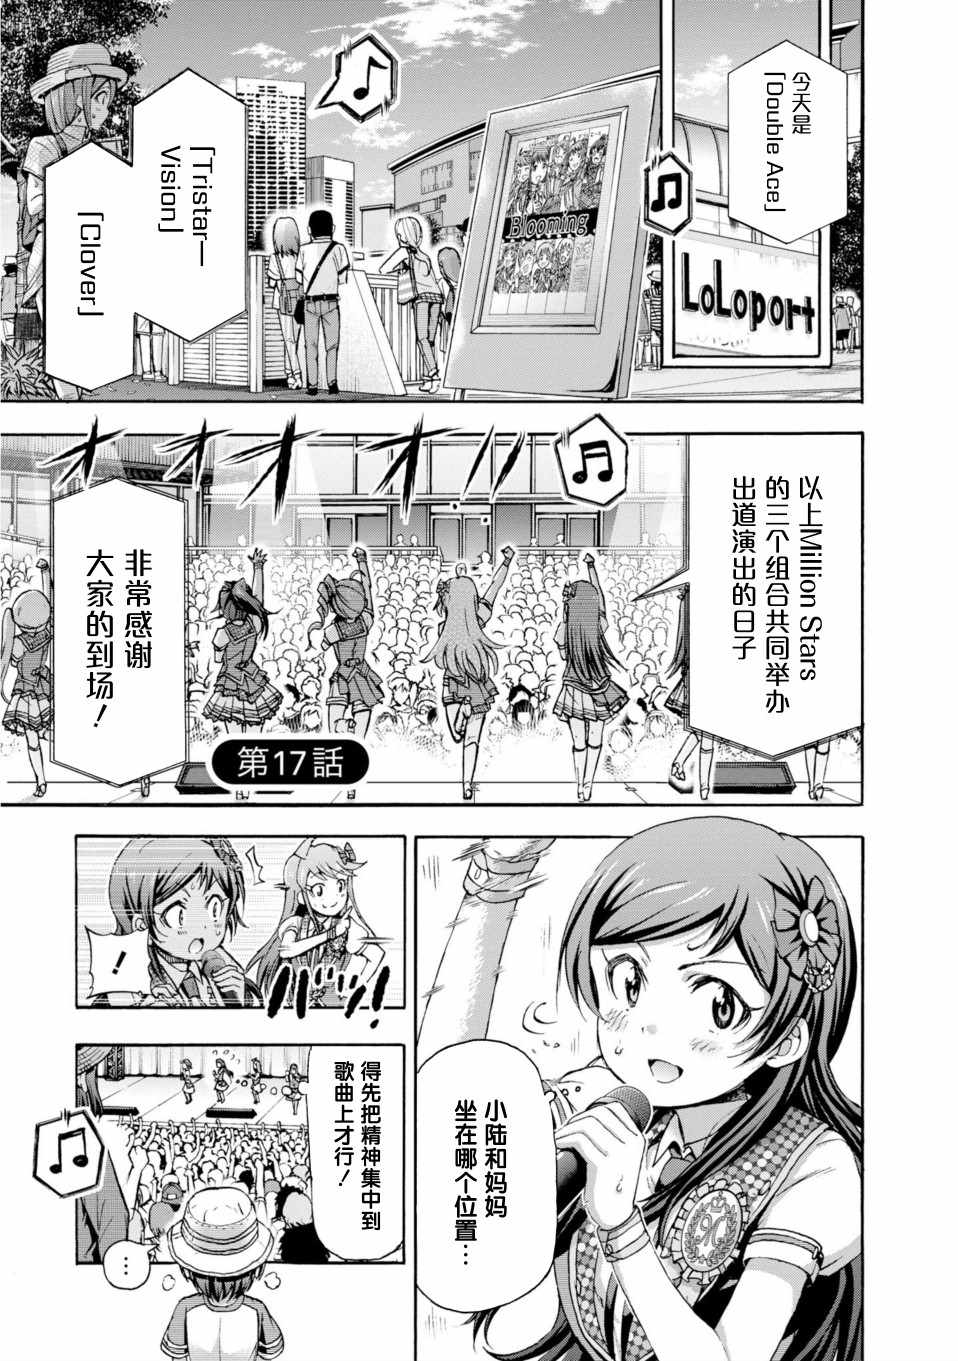 《THE IDOLM@STER MILLION LIVE! Blooming Clover》漫画 Blooming Clover 017集